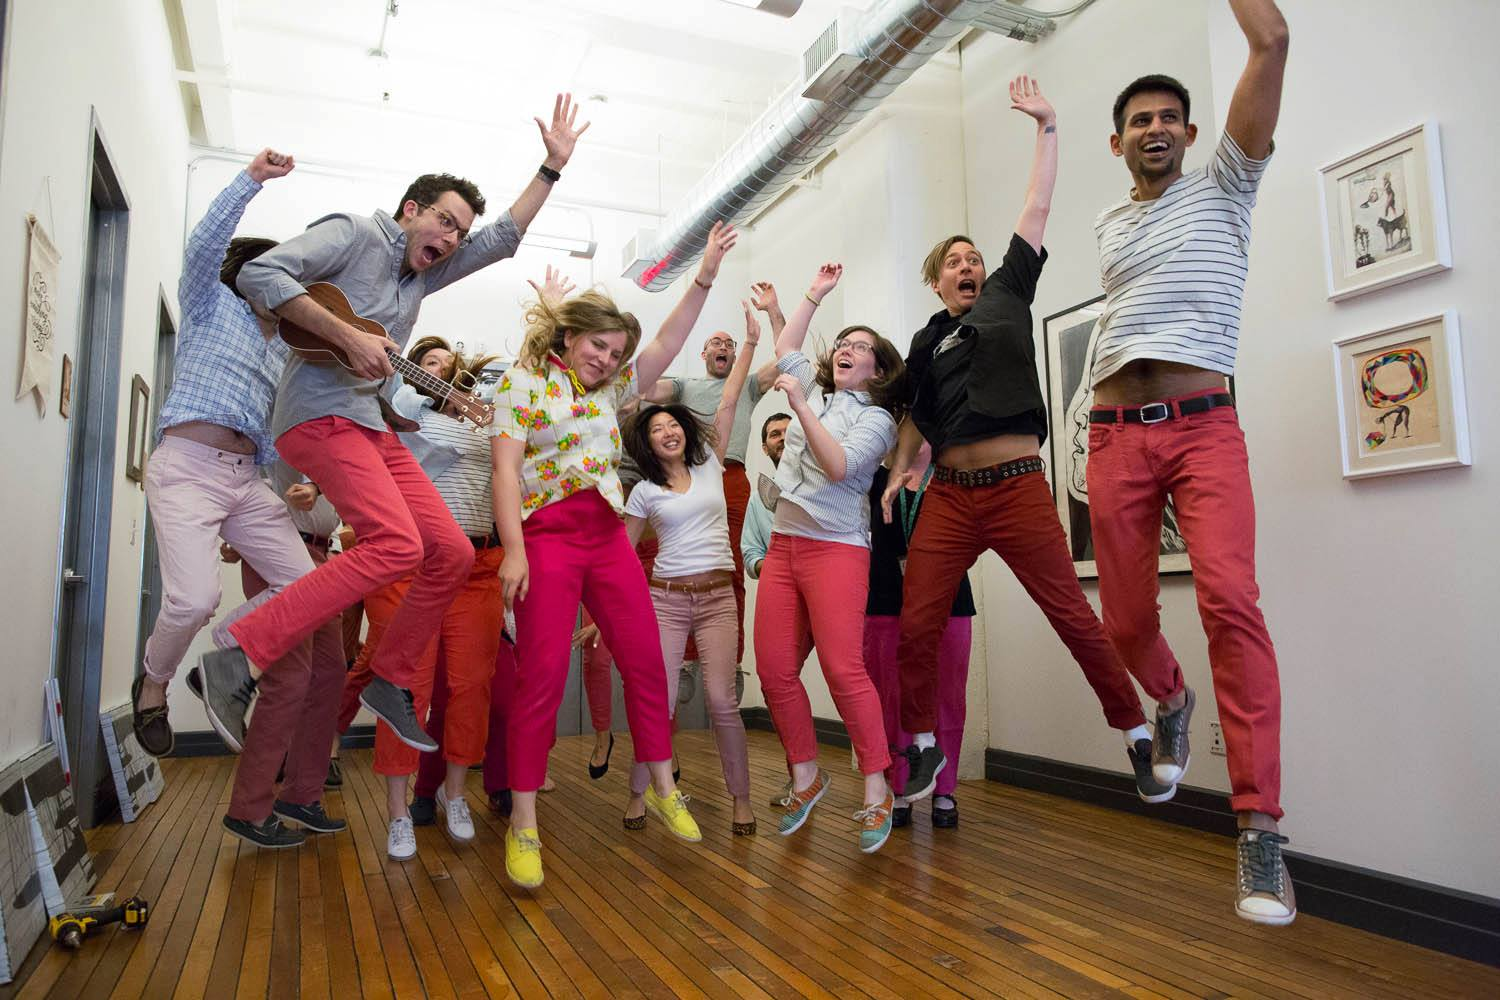 Etsy employees jumping while wearing pink pants